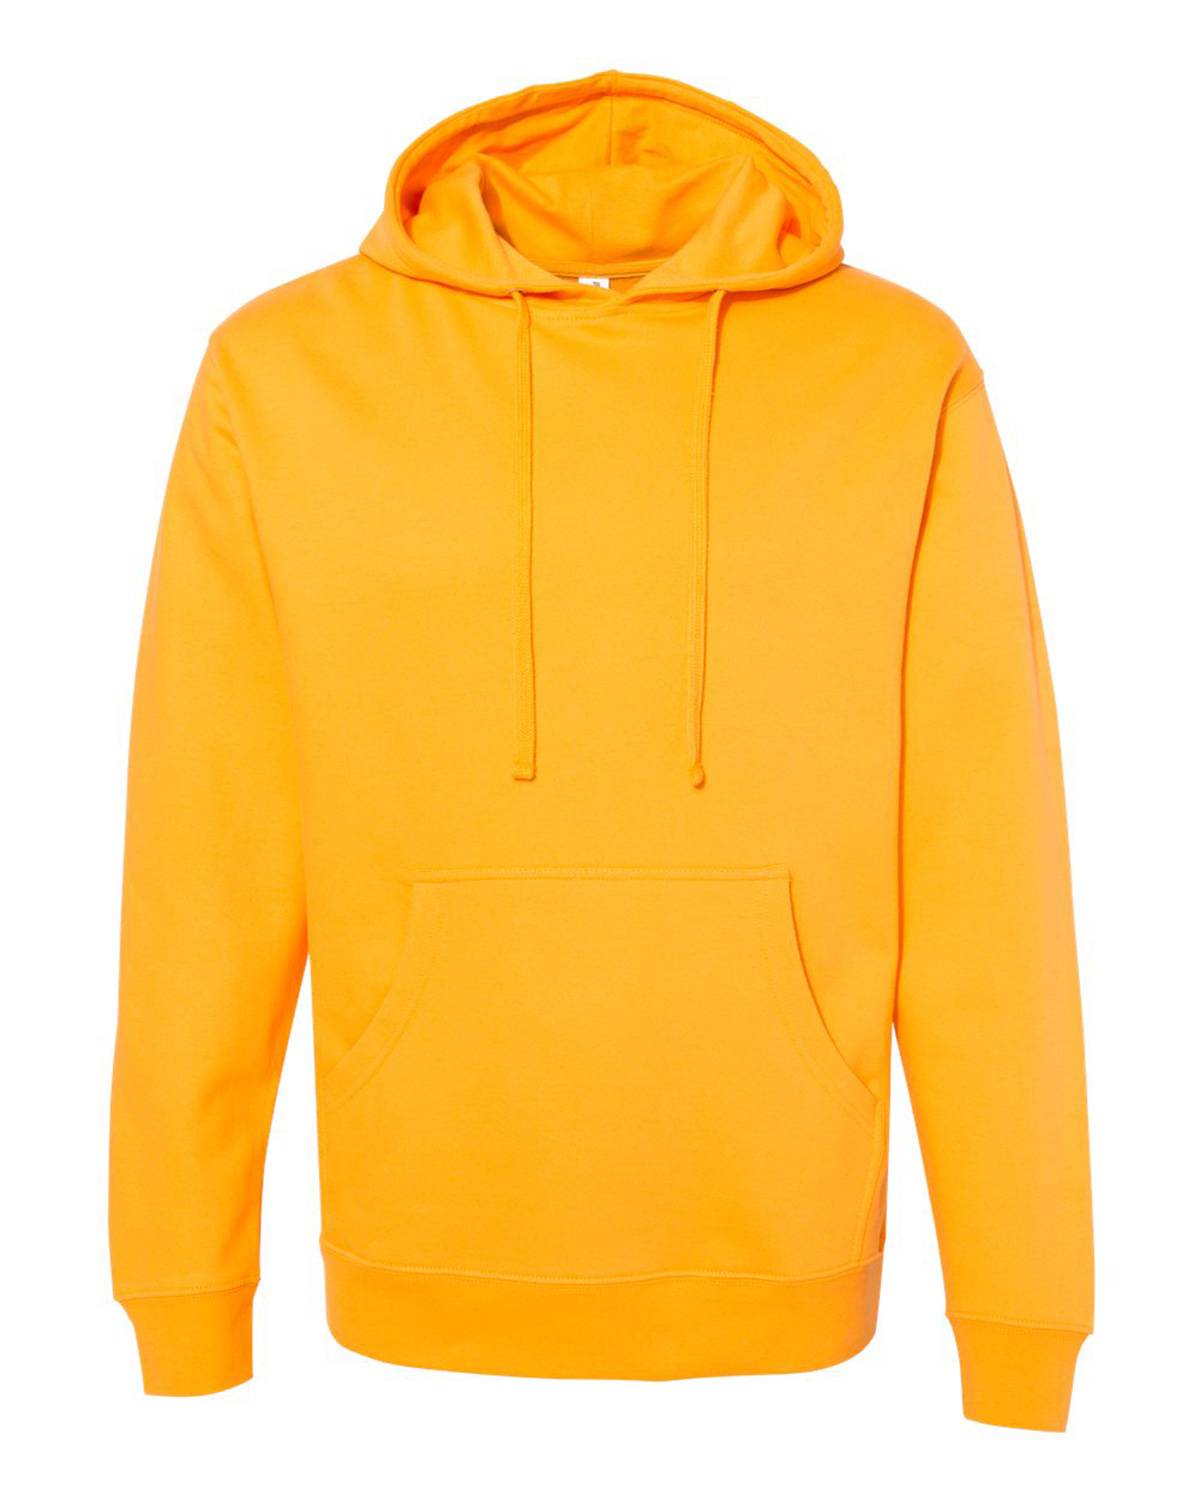 Independent Trading Company Hoodie Size Chart